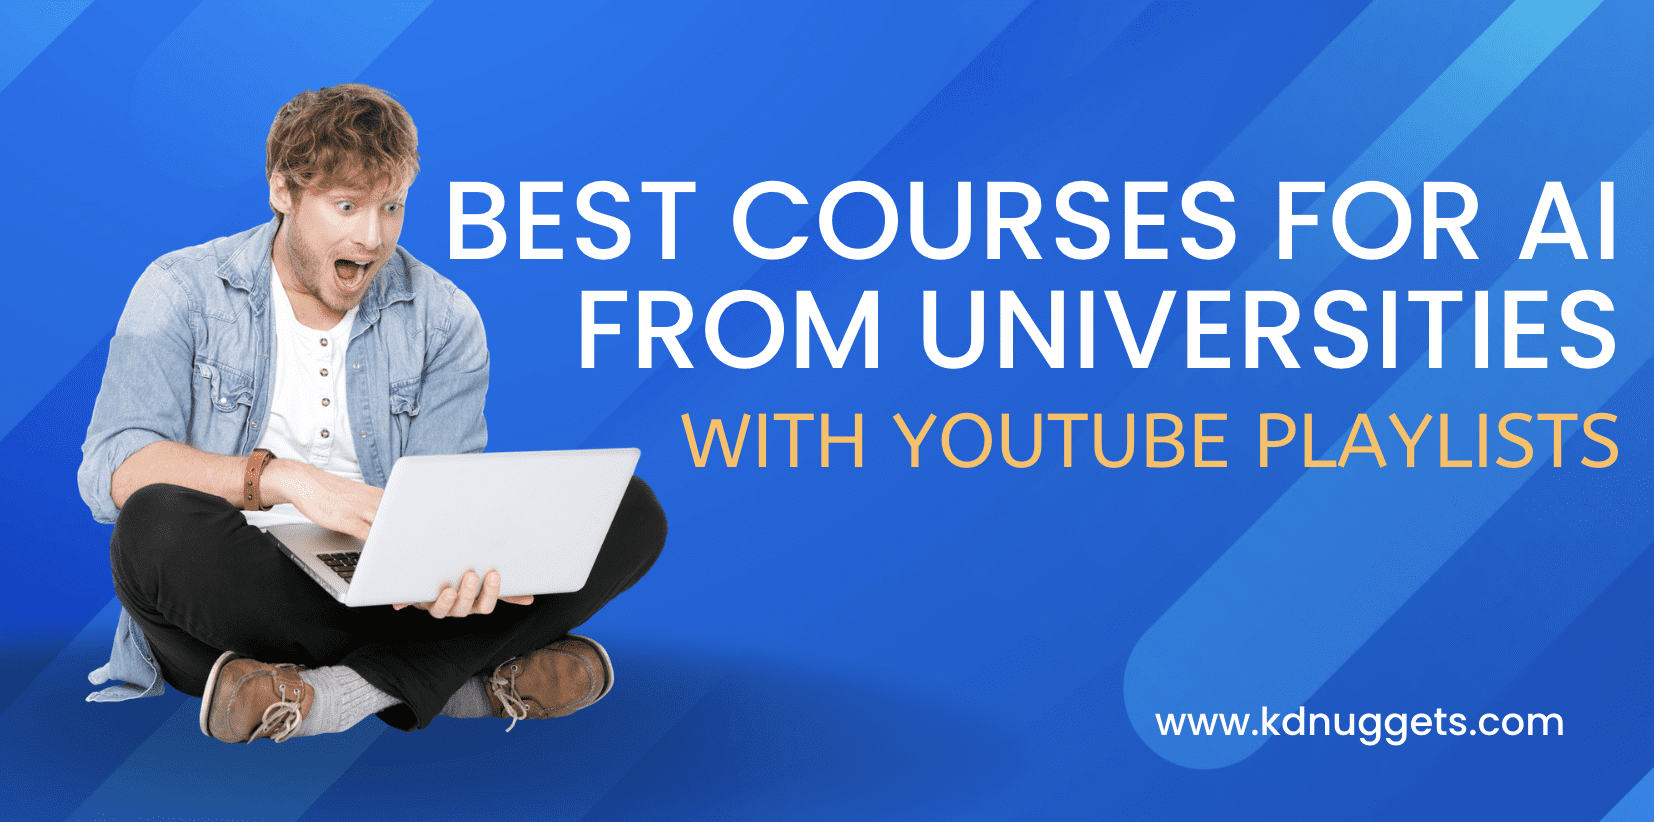 The Best Courses for AI from Universities with YouTube Playlists